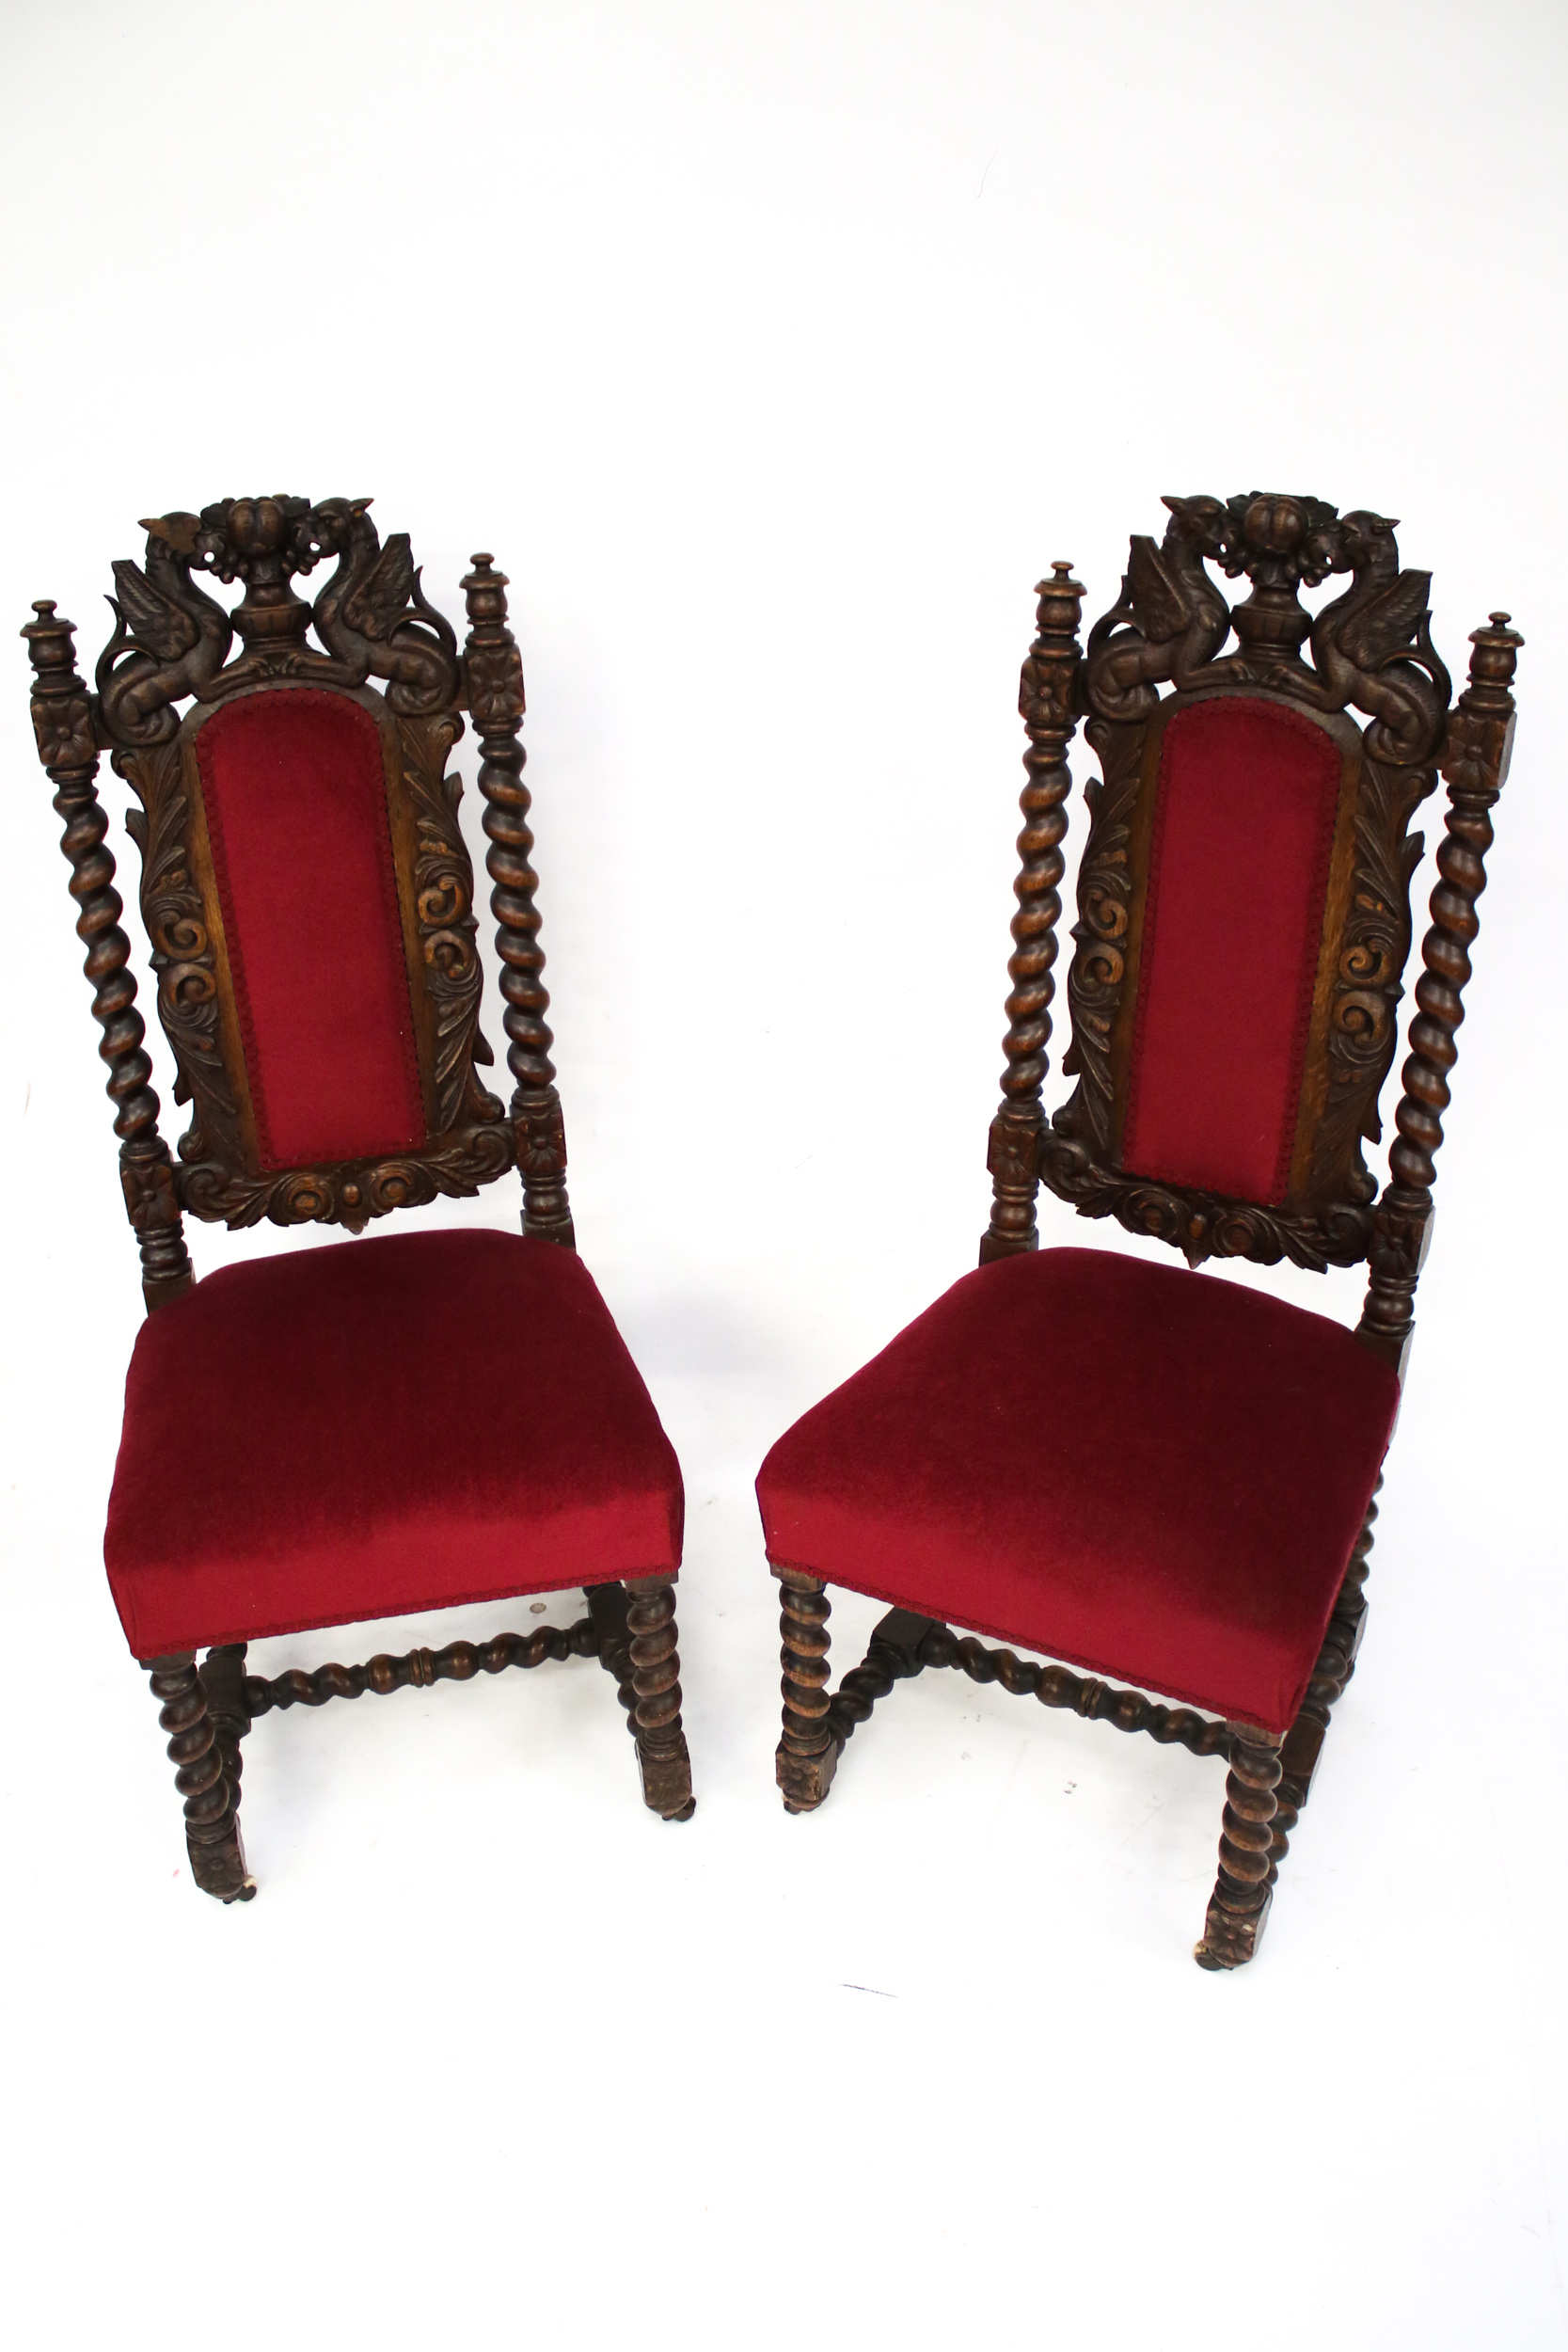 A pair of Victorian heavily carved oak chairs.